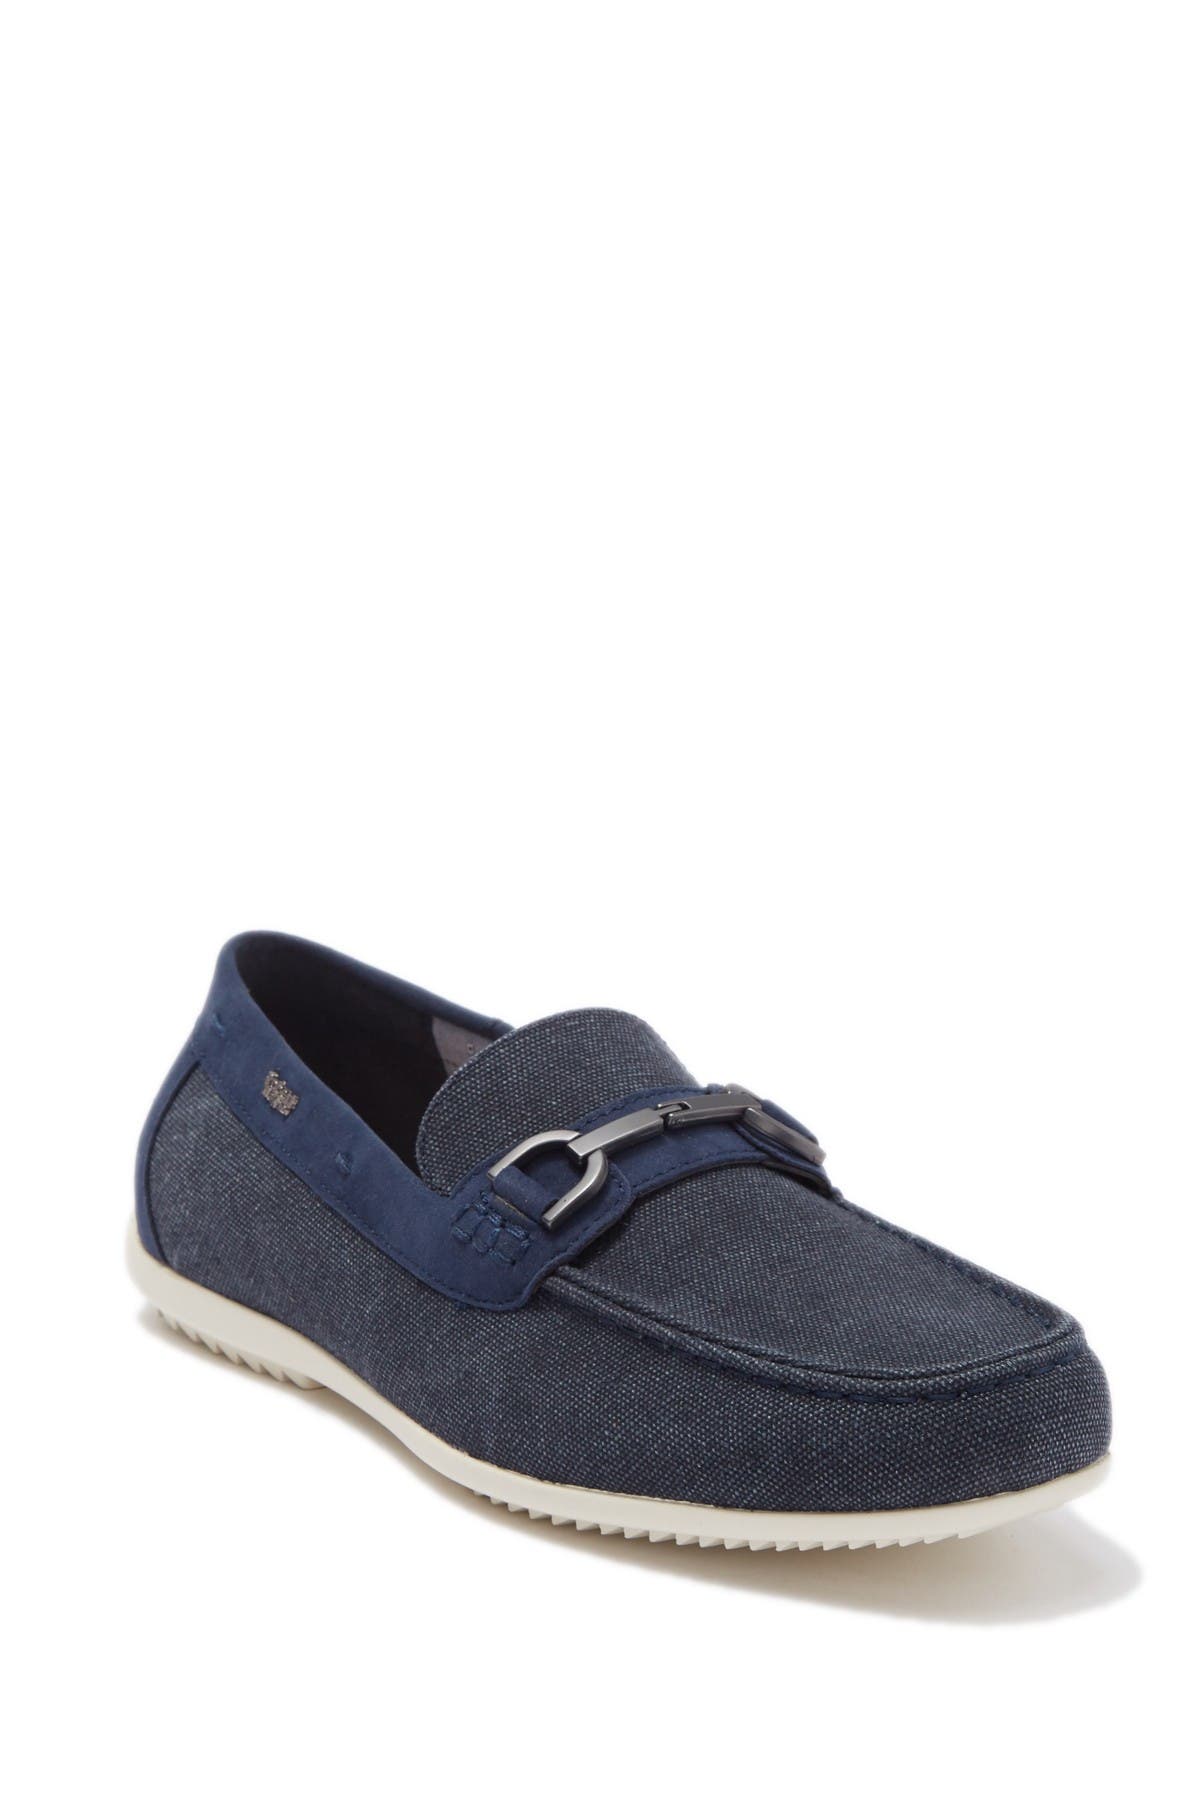 nordstrom rack womens loafers